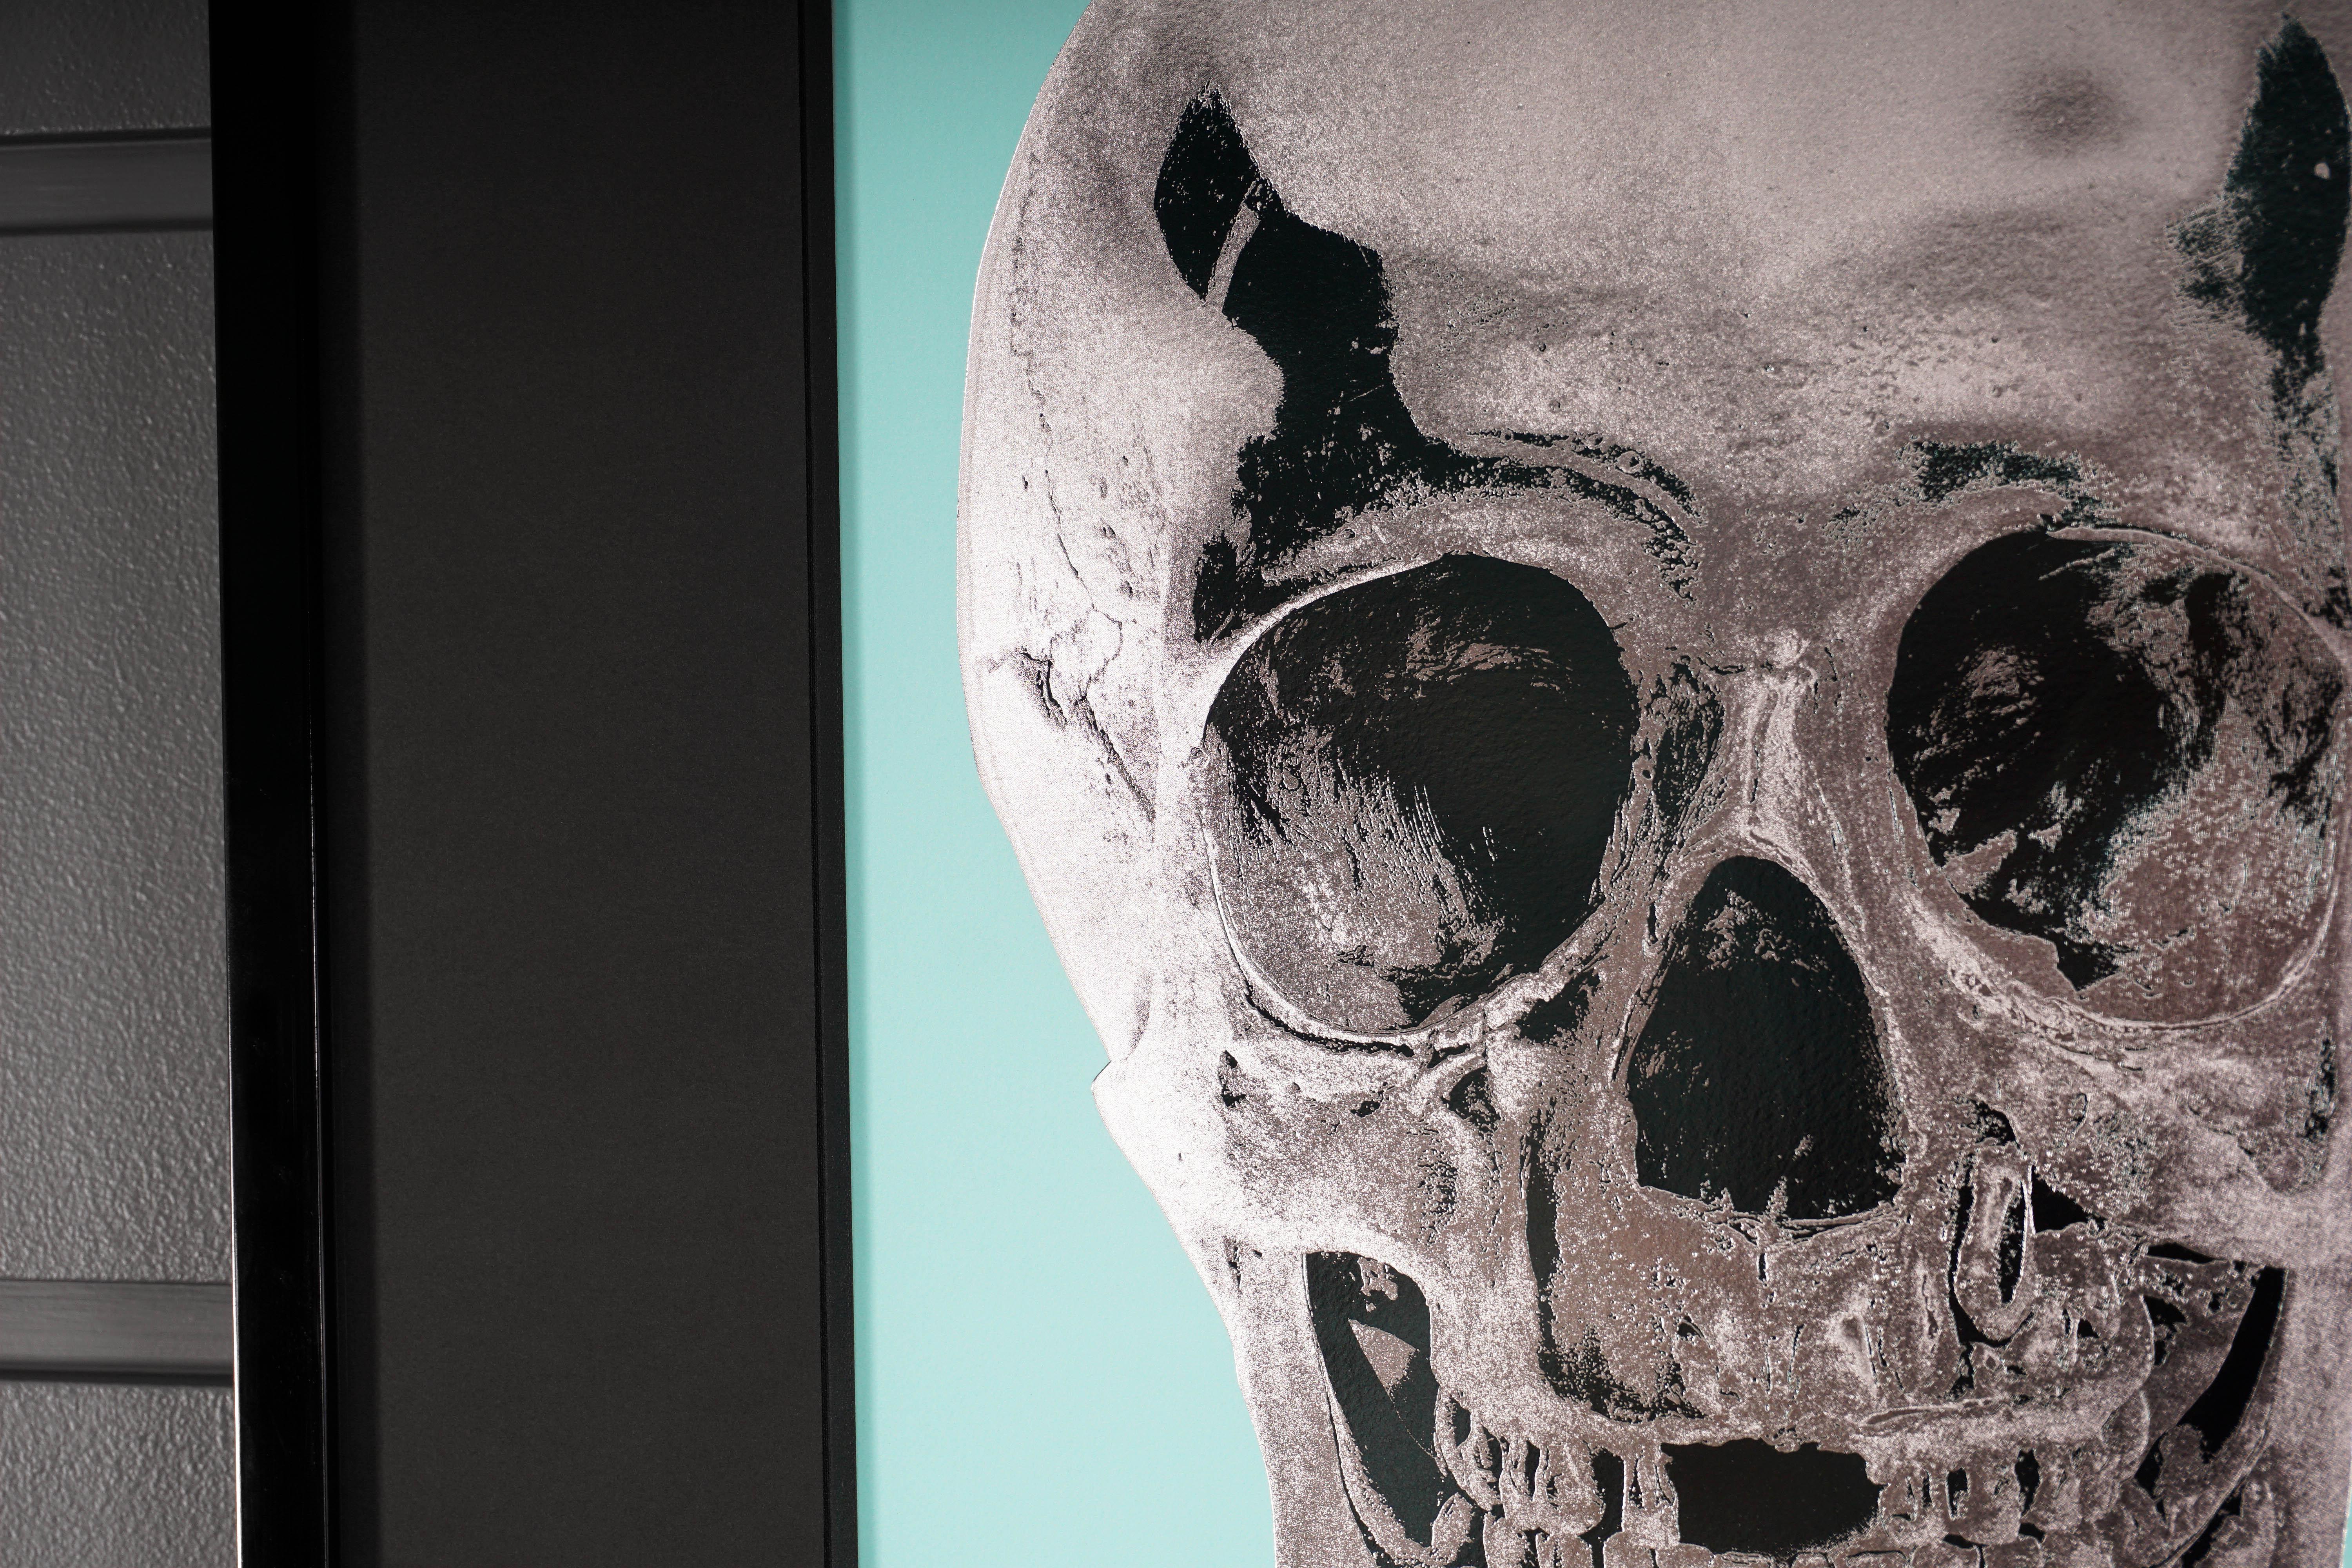 The ‘Till Death Do Us Part Skull in bright aquamarine is by master contemporary artist, Damien Hirst. This skull series is created in a small edition of only 50 pieces, each signed and numbered by the artist in pencil on the lower right corner. The